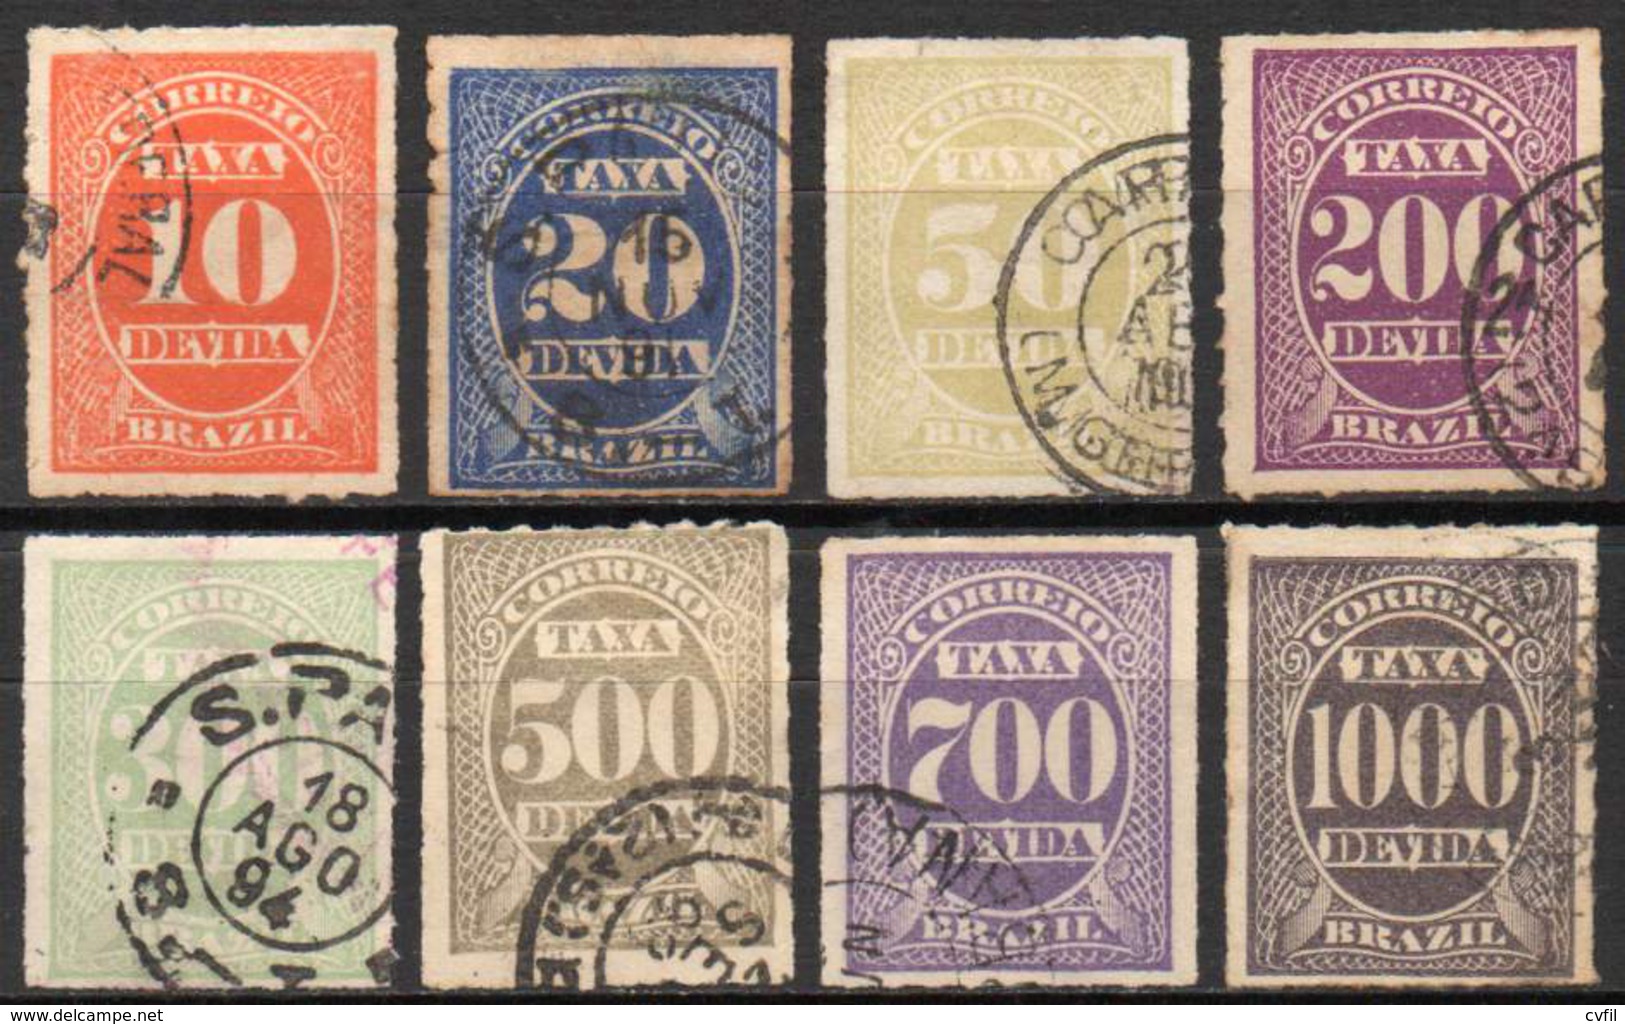 BRASIL 1890 - TAXA DEVIDA. The Second Set To Be Used In The Provinces Of The Empire, Very Fine Used (8) - Segnatasse